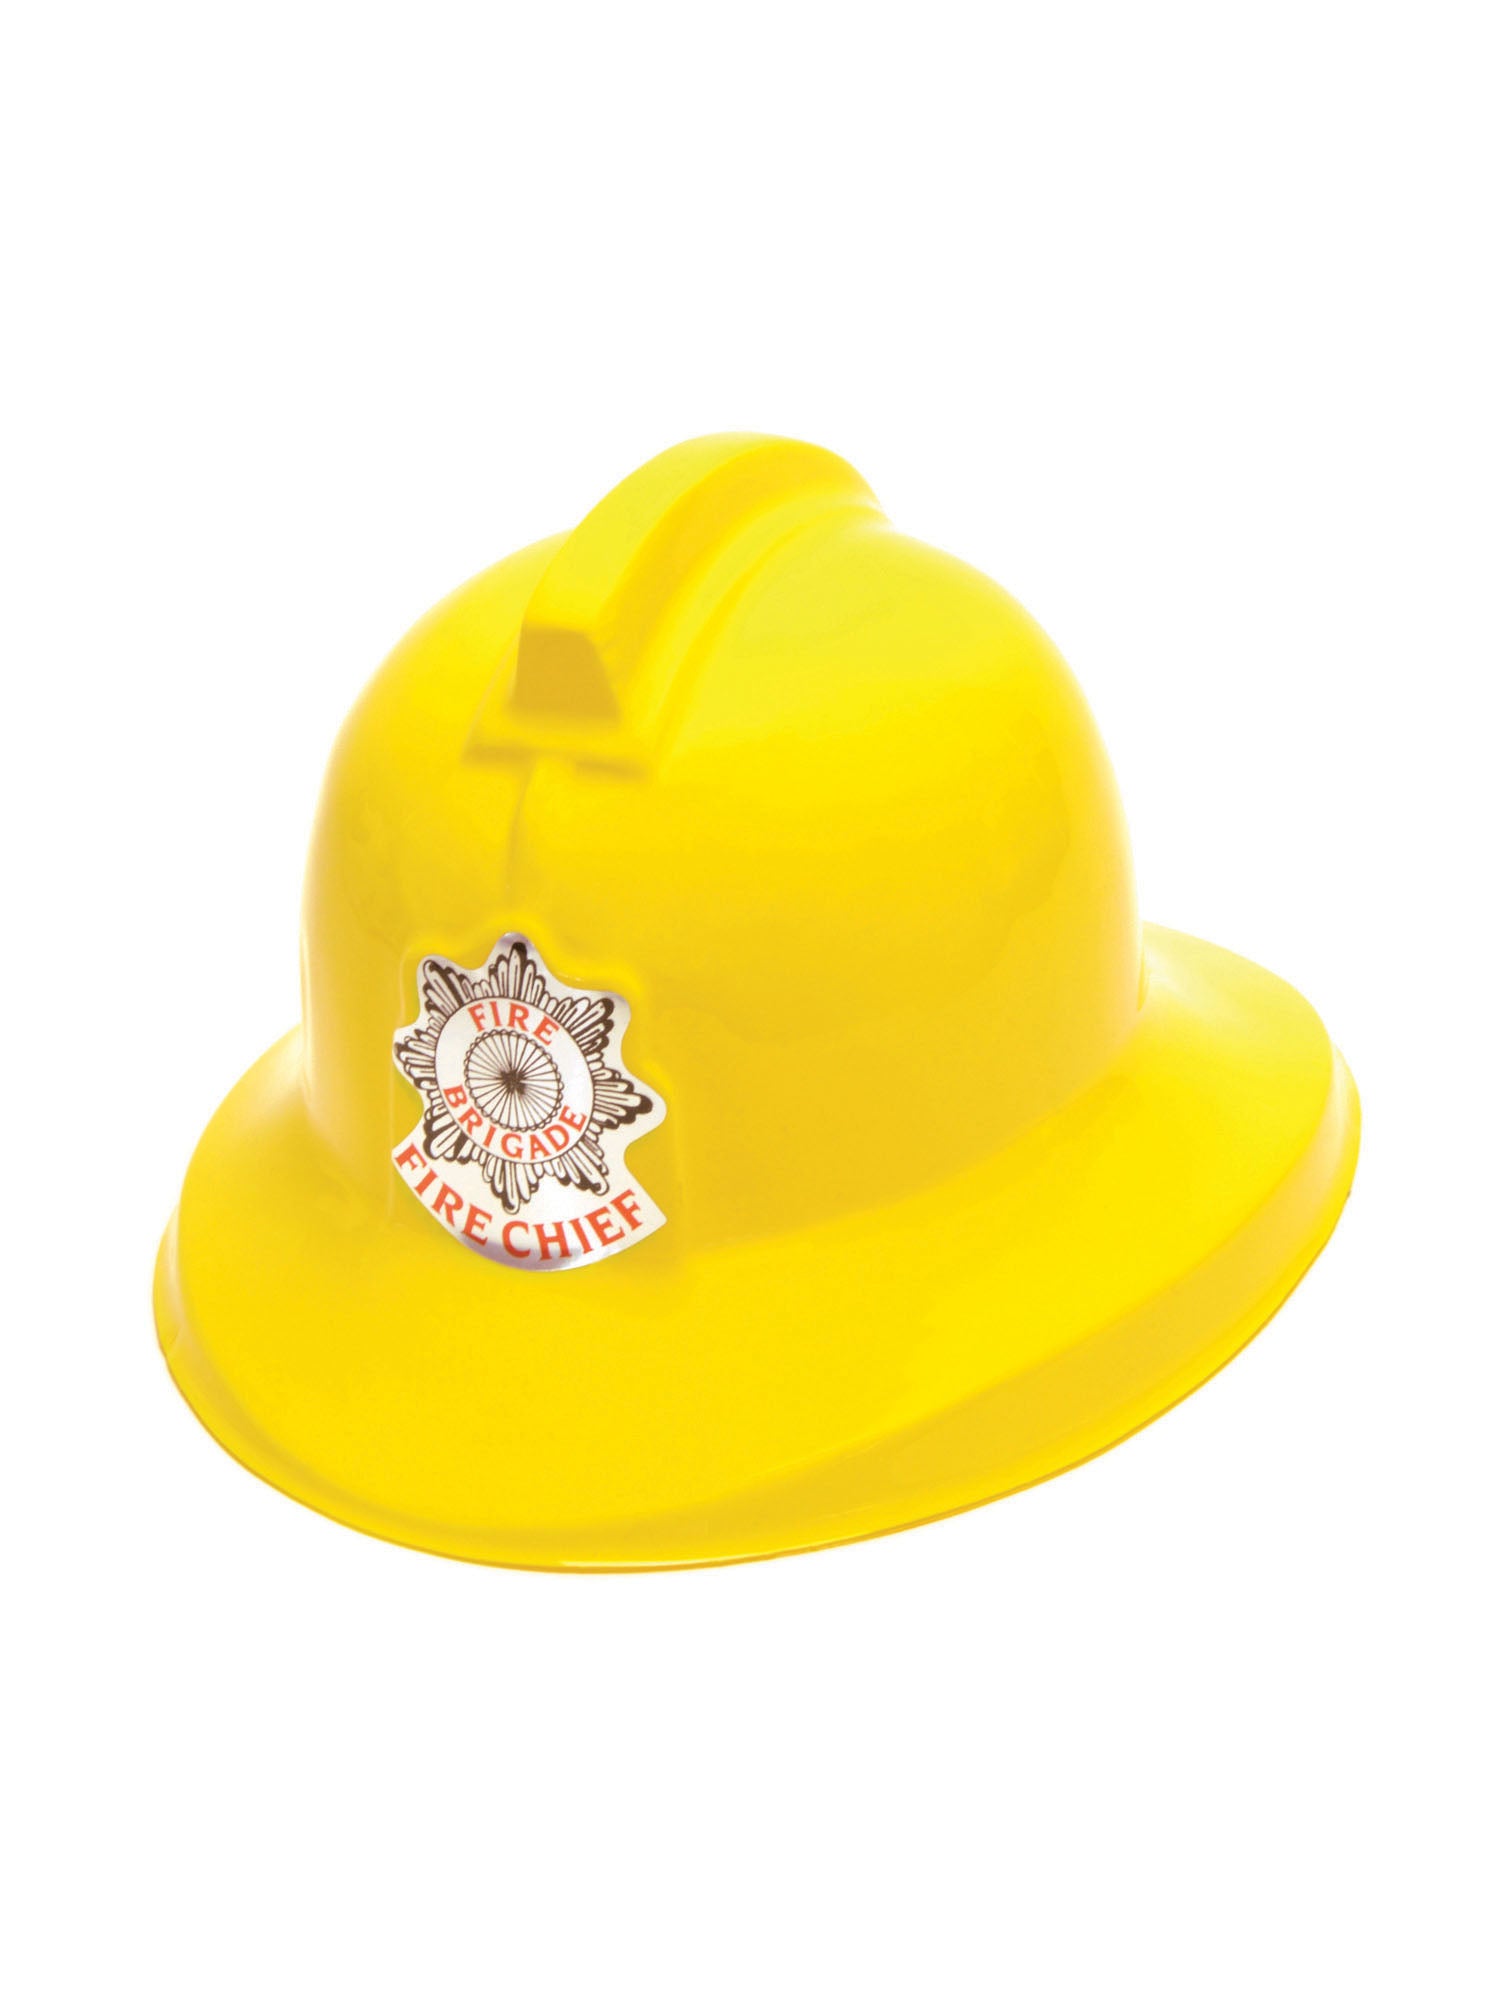 Fireman, Yellow, Generic, Hat, Adult, Front